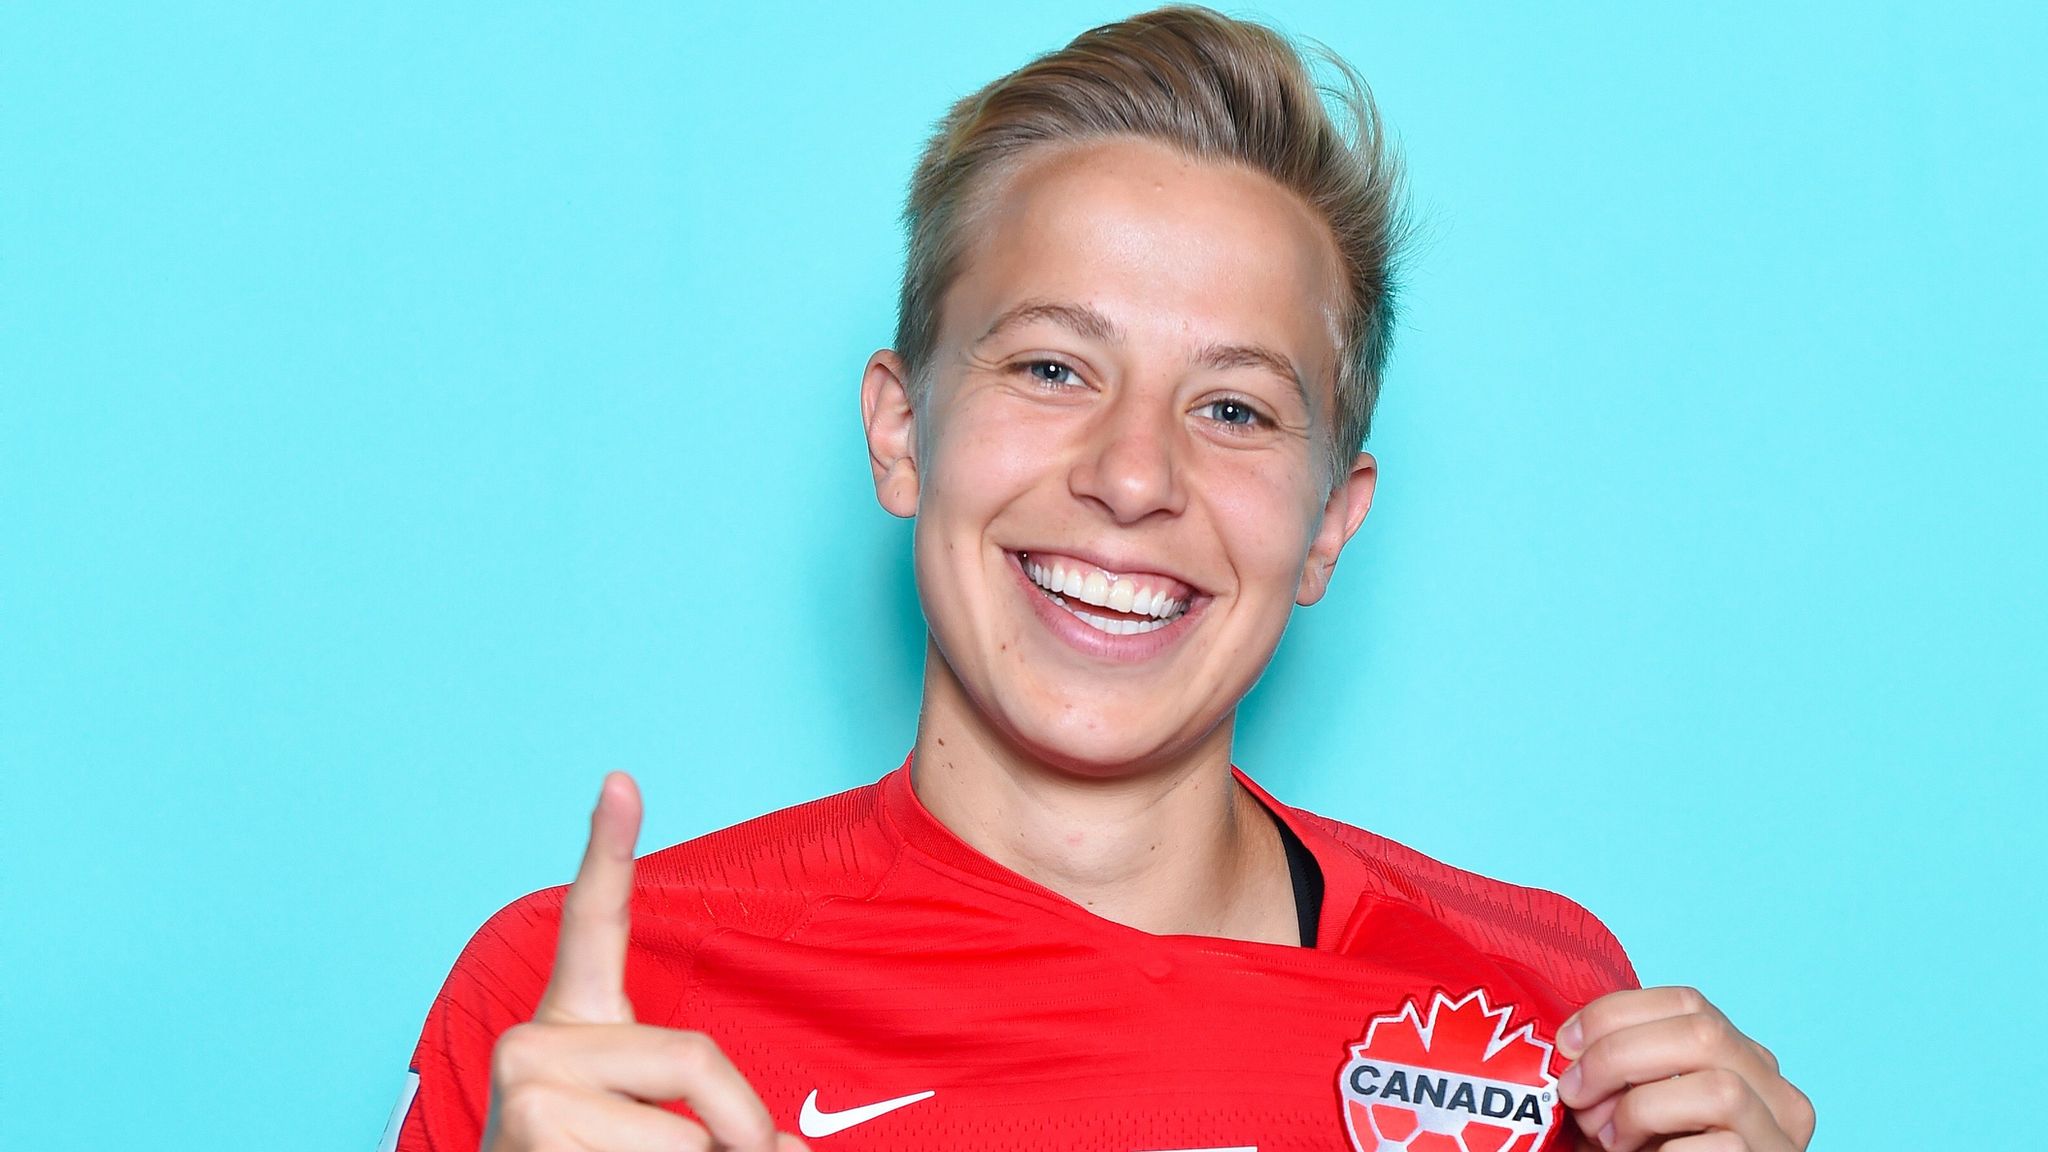 Quinn during a photoshoot ahead of the 2019 Women's World Cup